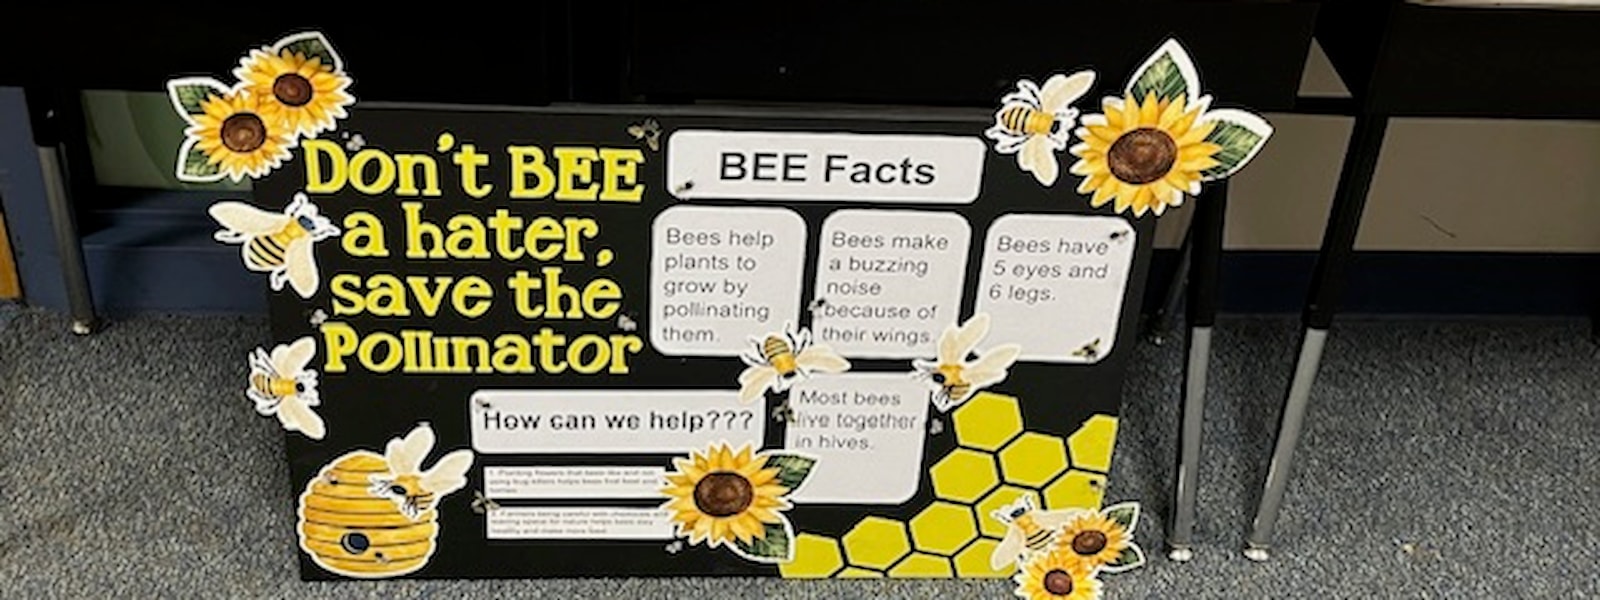 student's project on bee facts